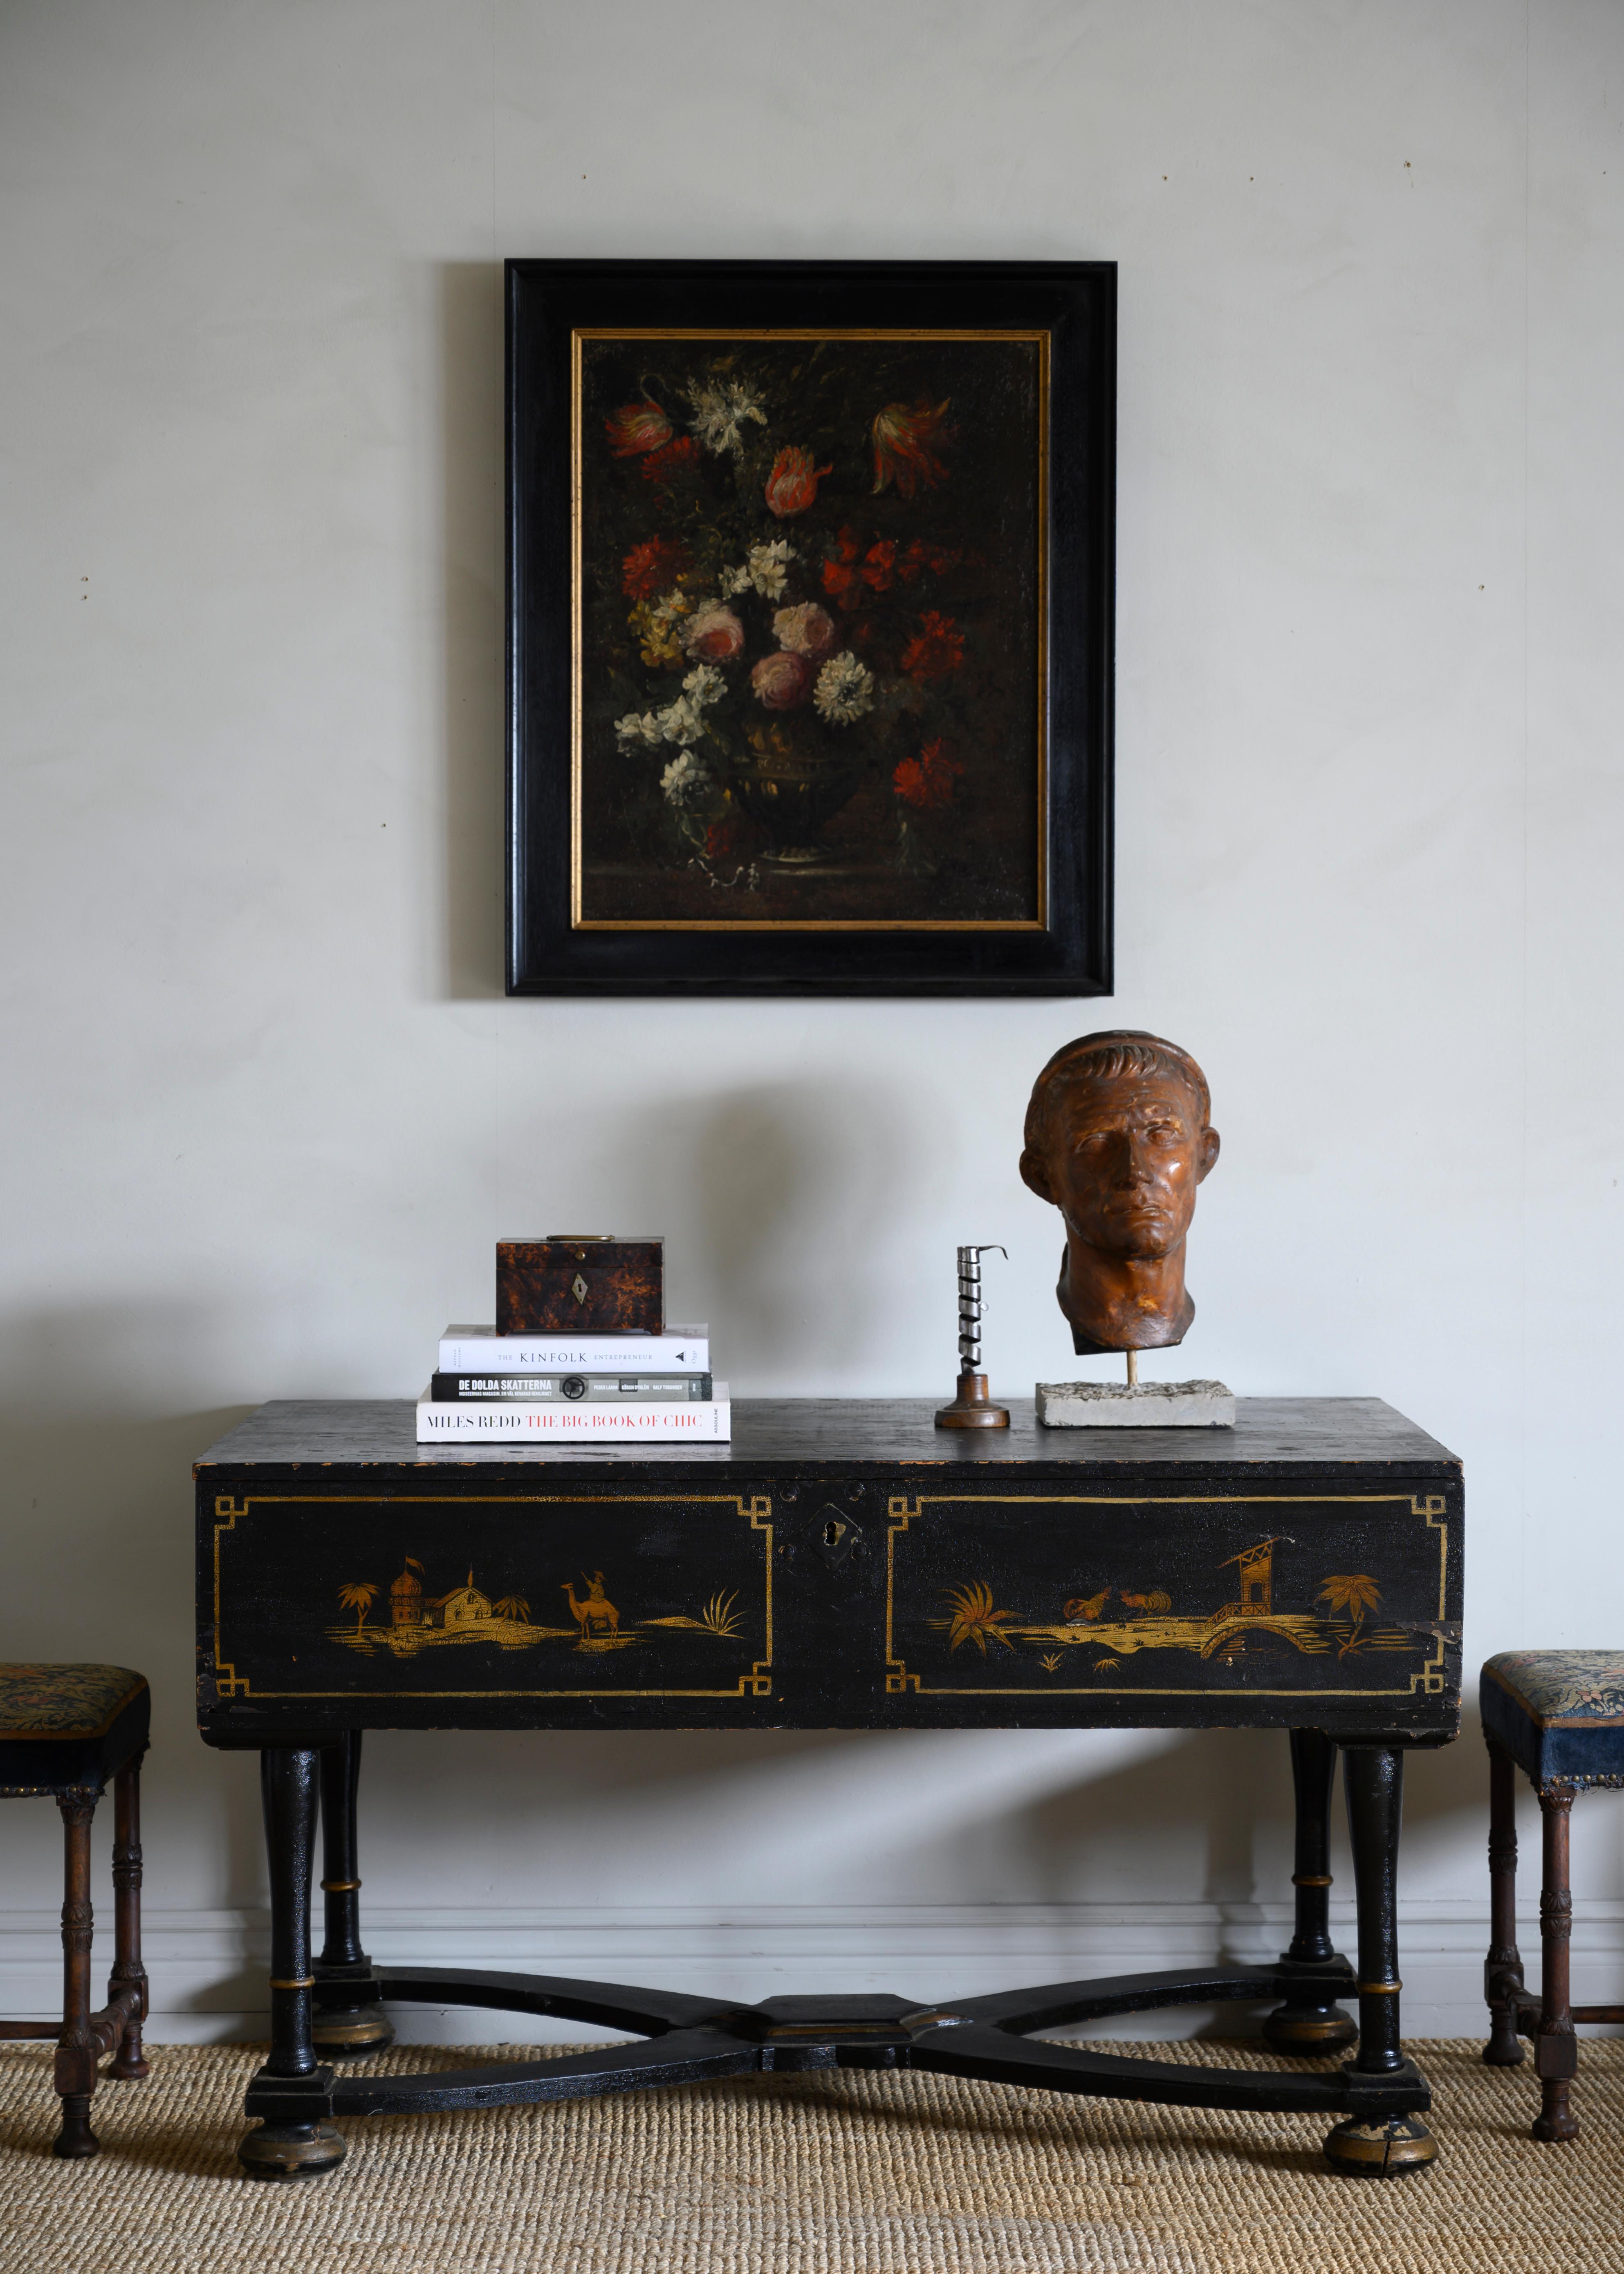 18th century Swedish late Baroque chinoiserie console table with a storage compartment under the top, circa 1750 Sweden 

The console has been re-lacquered circa 1830 and shows light scratches and wear from previous use but remains in fair